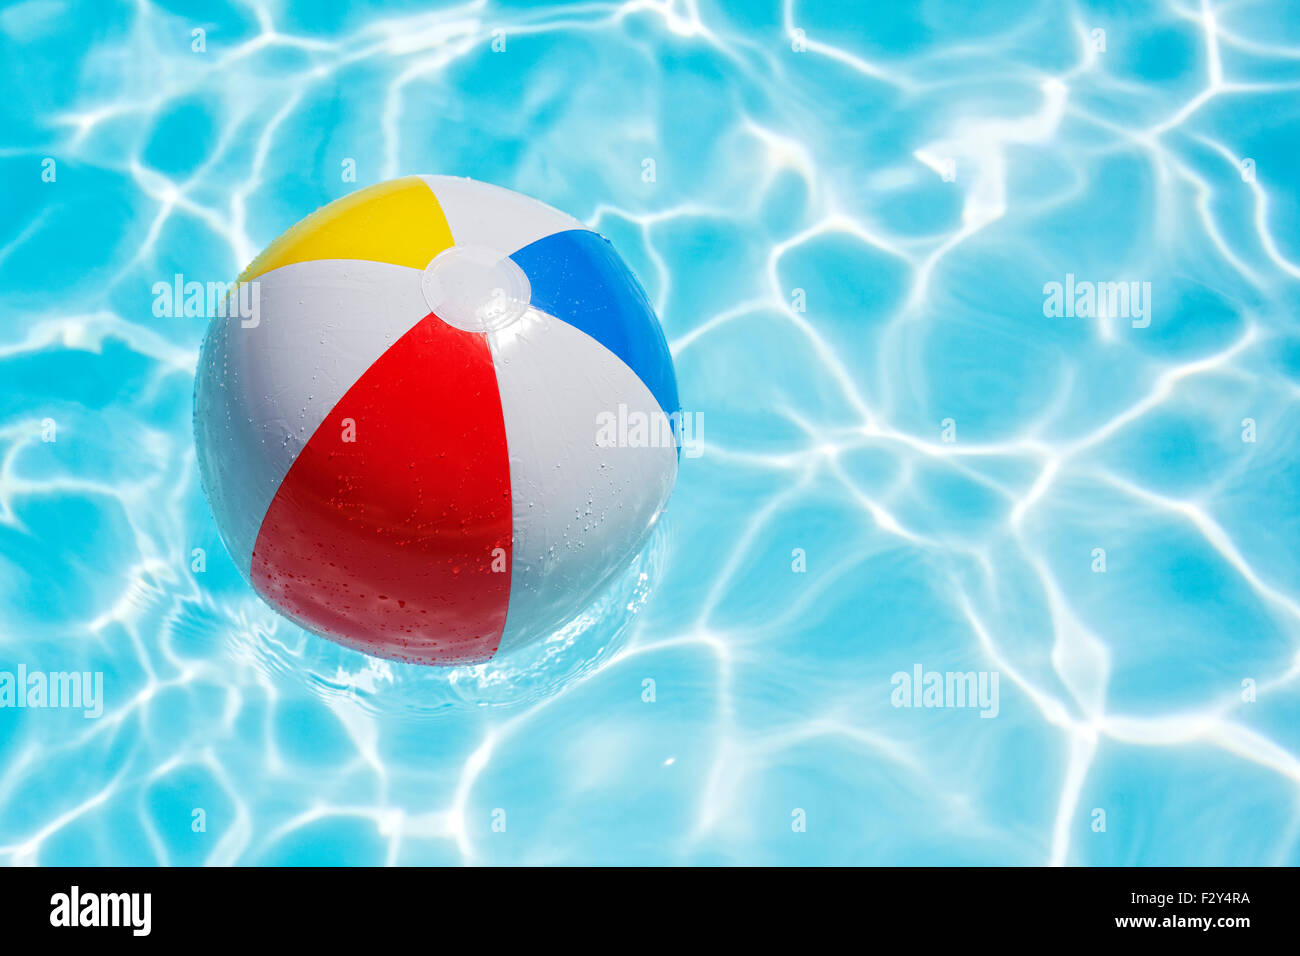 Beach ball floating in swimming pool abstract concept for summer vacations, relaxation and fun in the sunshine Stock Photo